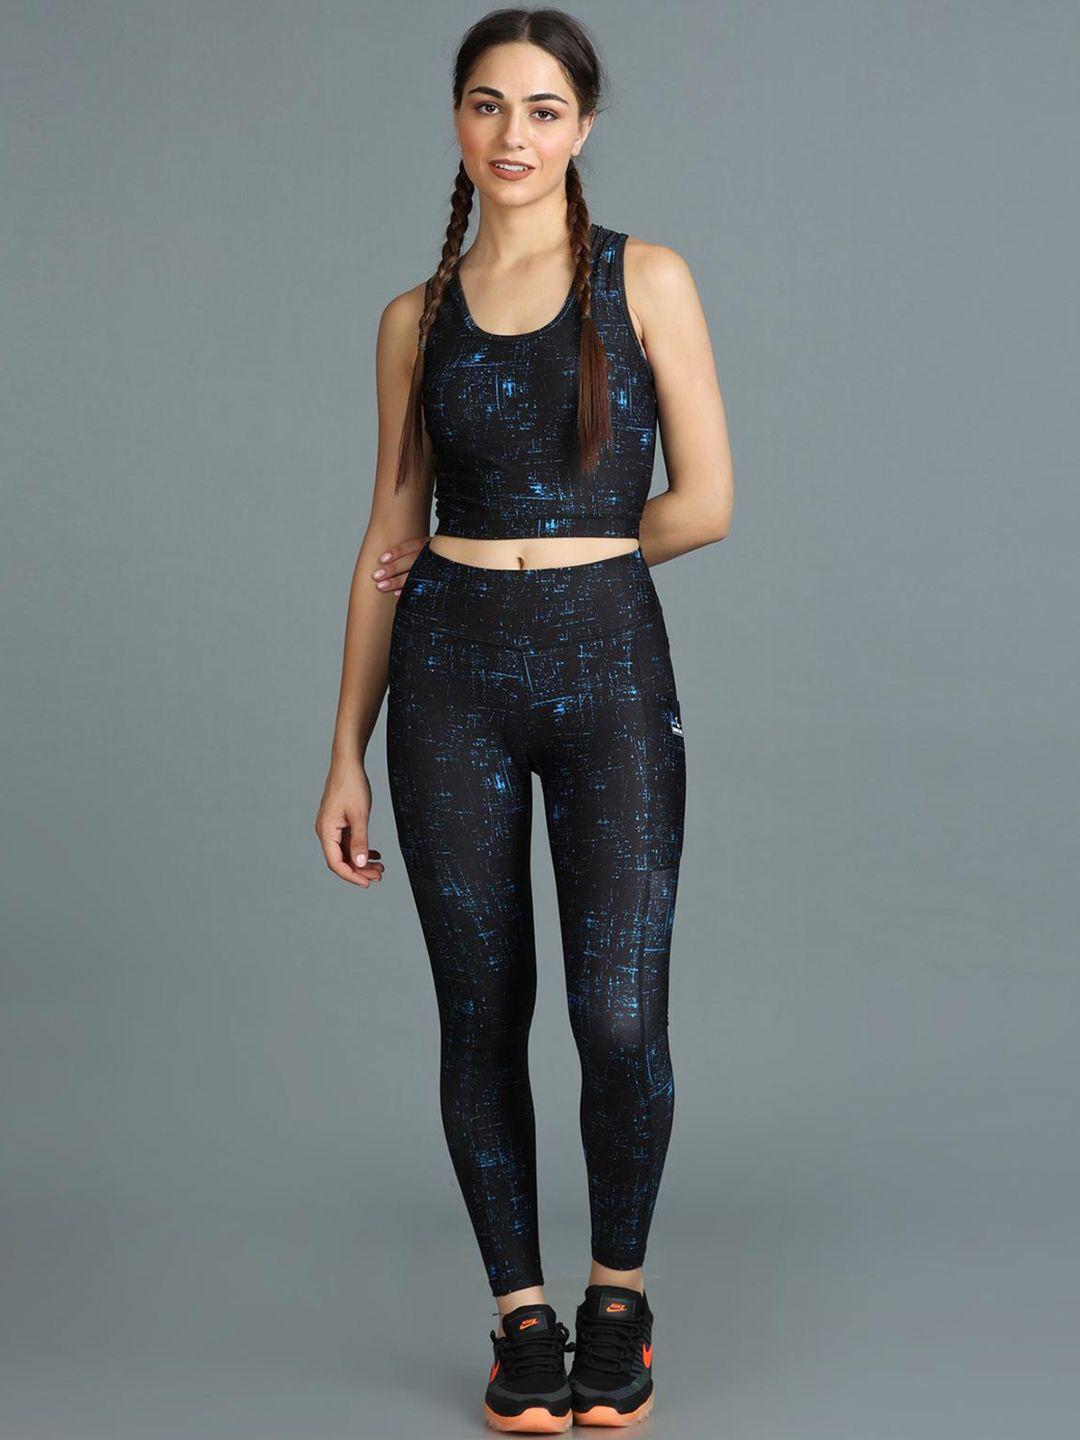 the dance bible printed padded sports top & activewear leggings co-ords